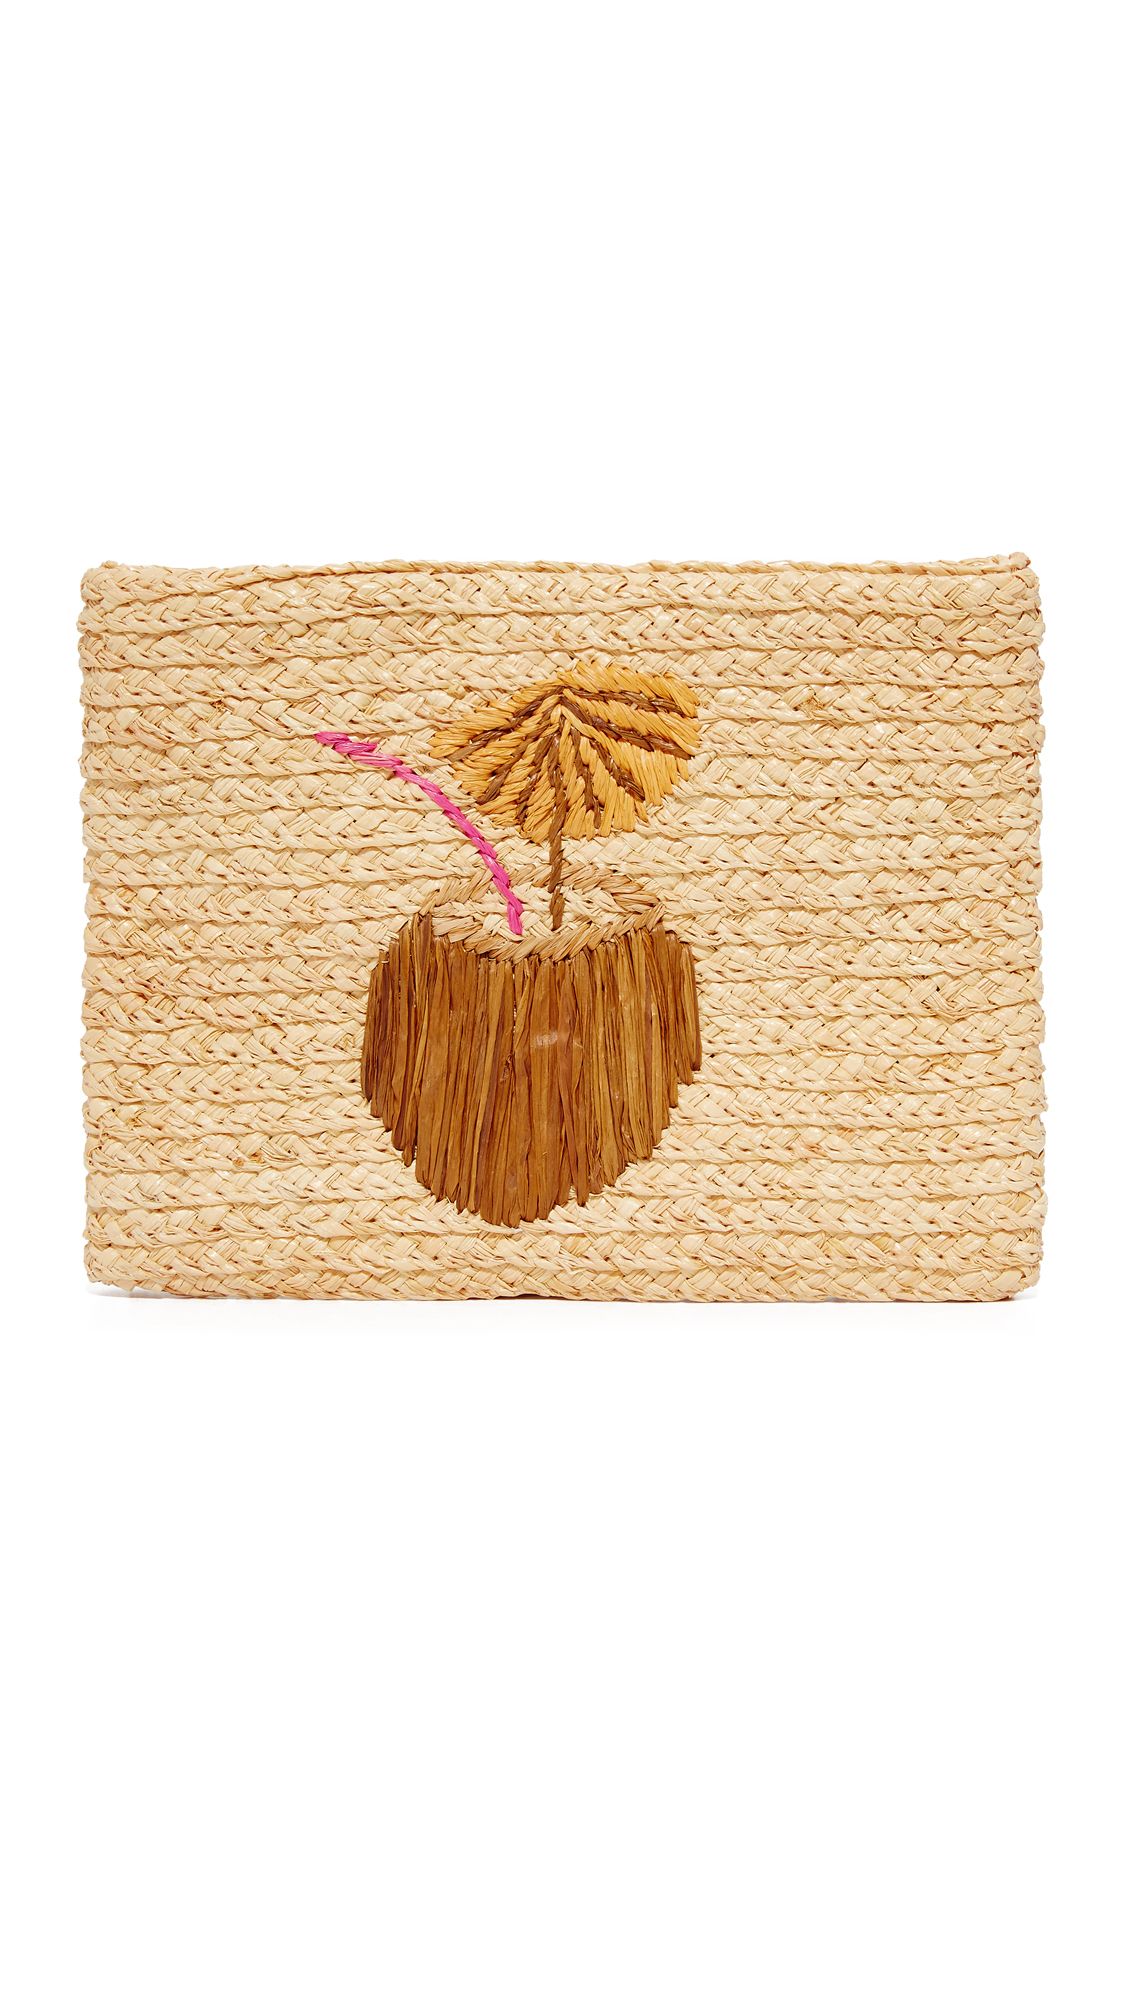 Embroidered Clutch | Shopbop